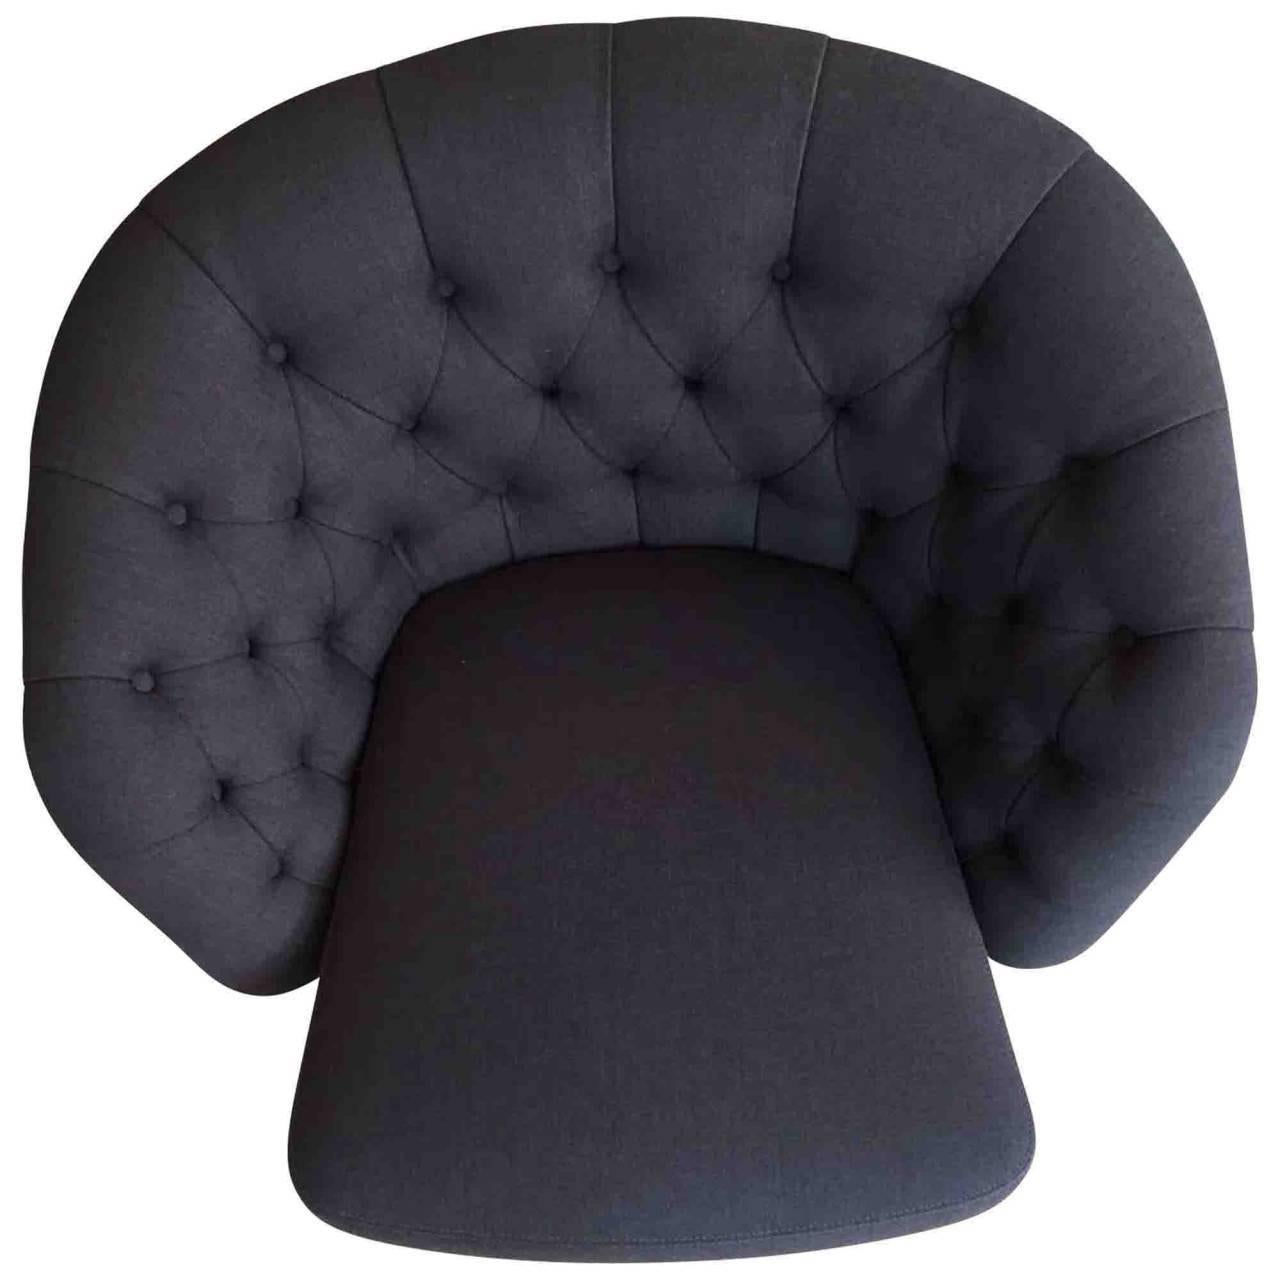 We are delighted to present to you the stunning armchair 